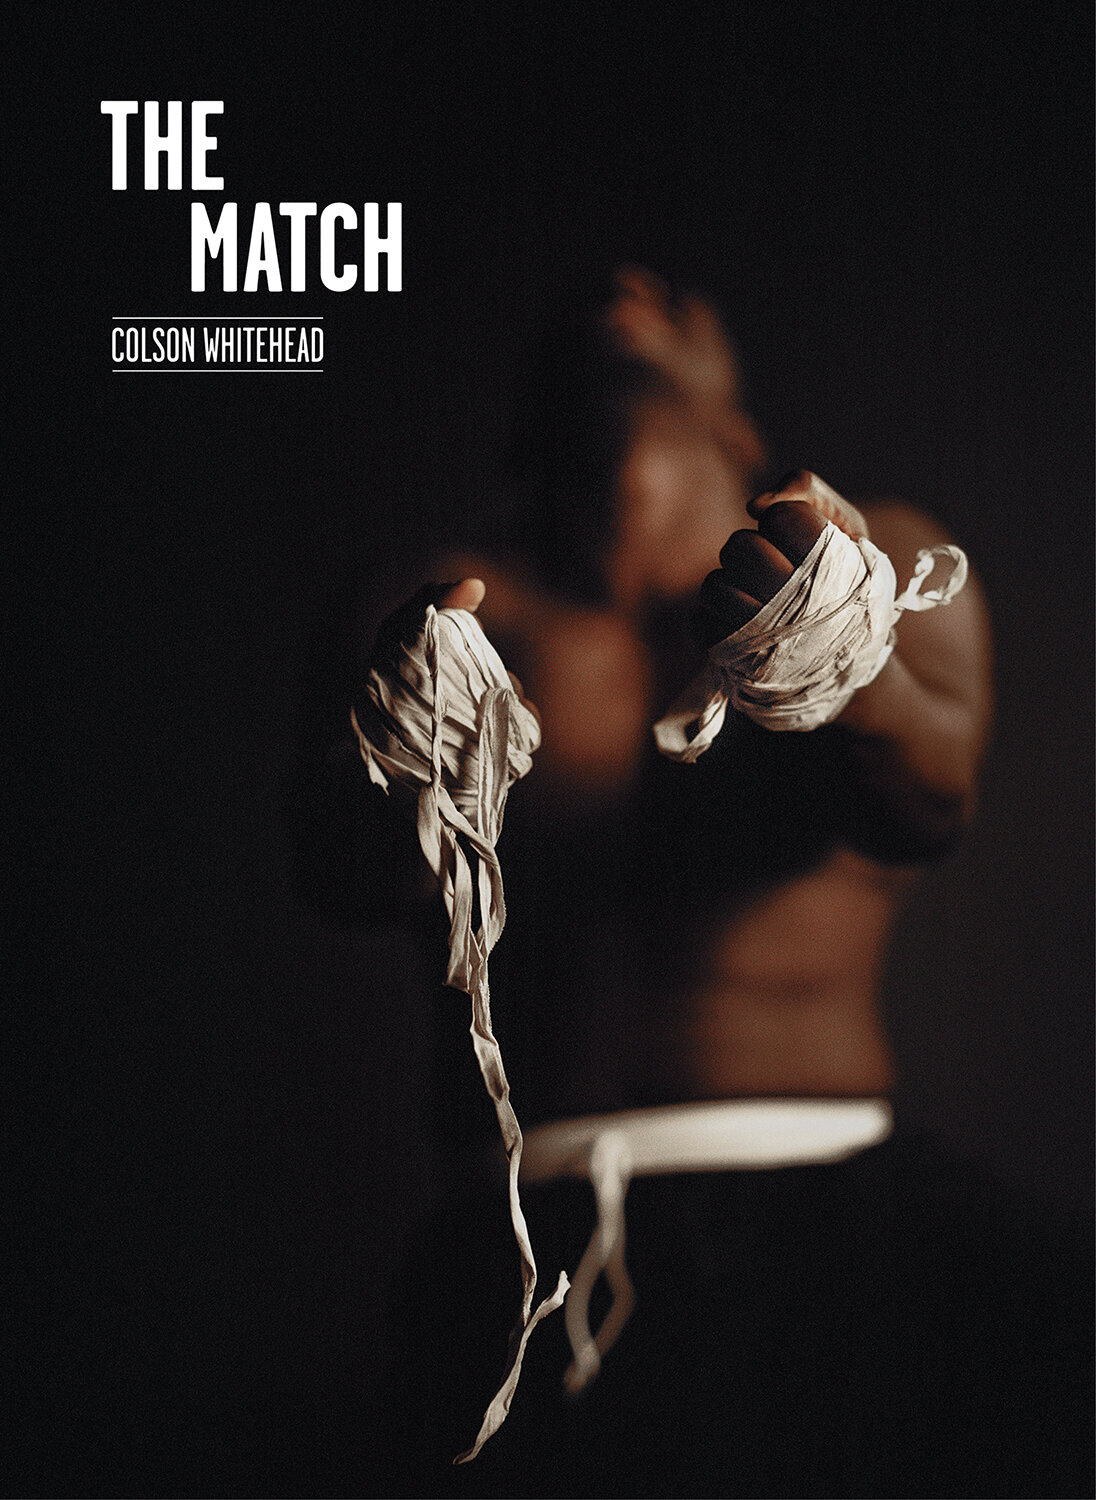  The New Yorker - The Match 